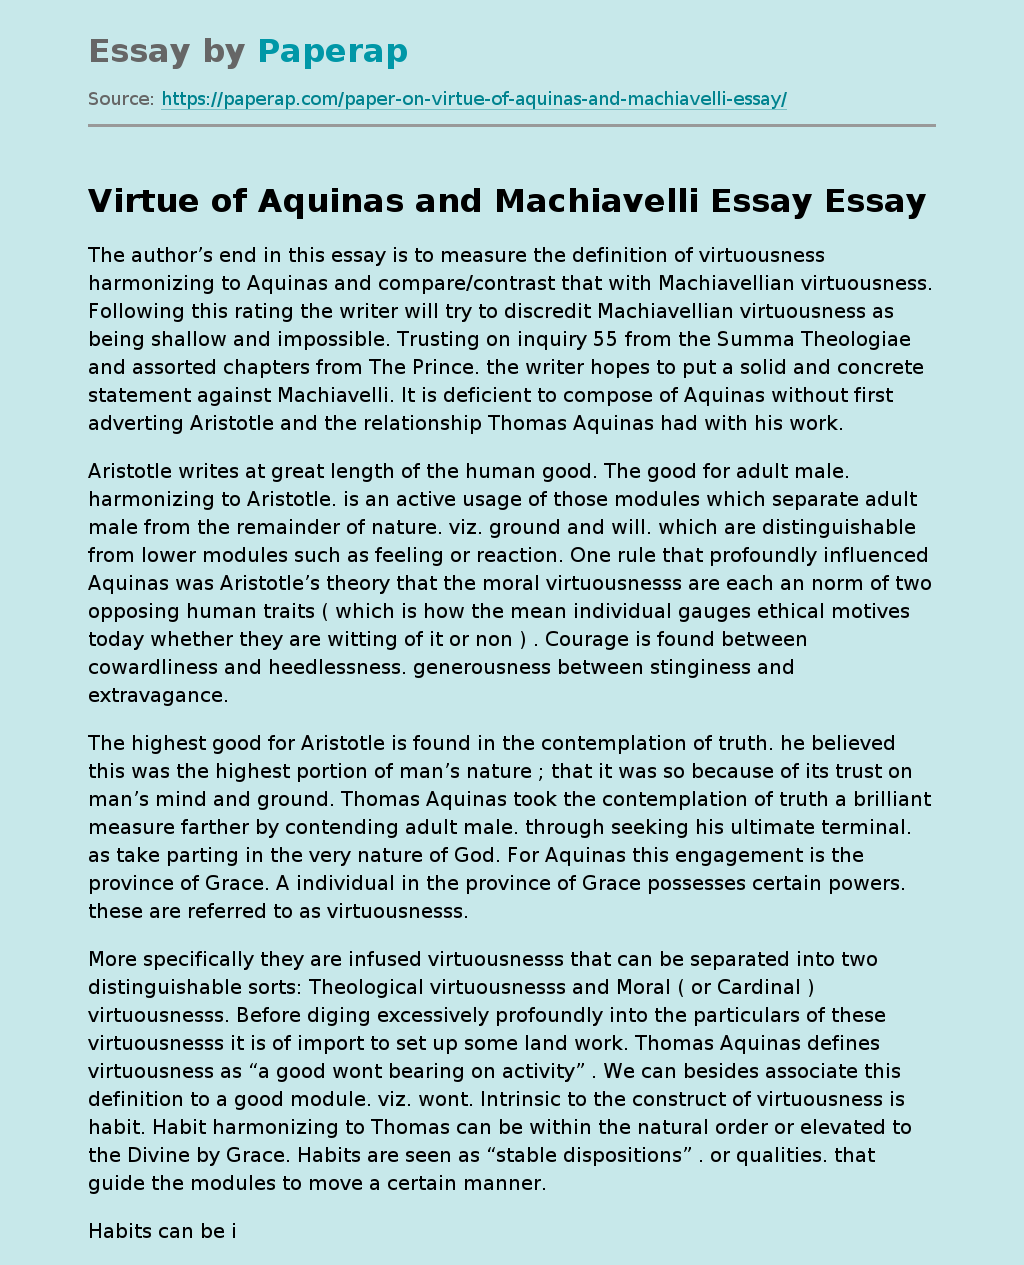 Virtue of Aquinas and Machiavelli: Positive Moral Character